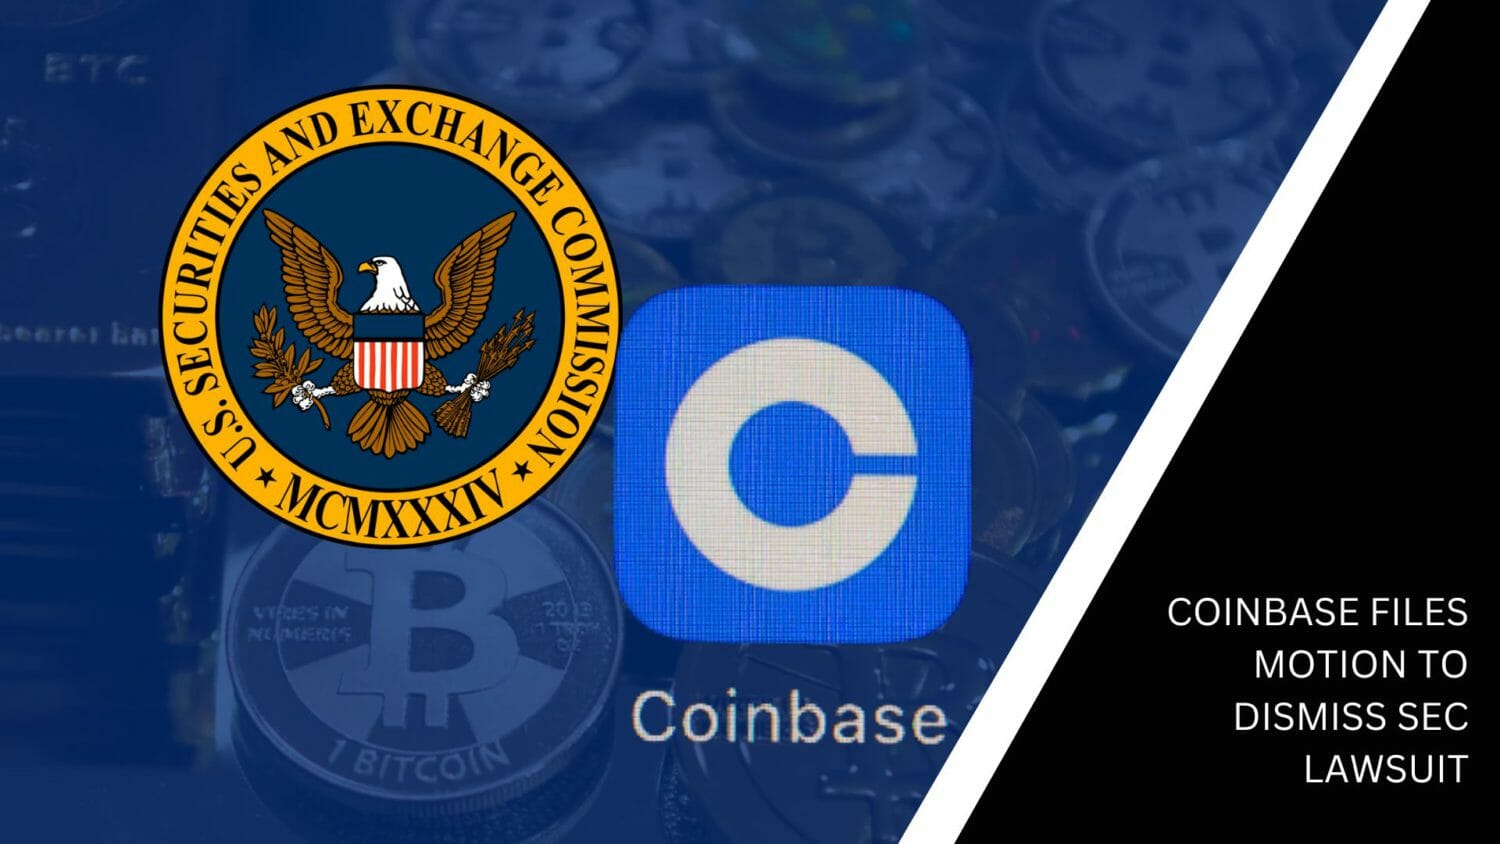 Coinbase Files Motion To Dismiss Sec Lawsuit